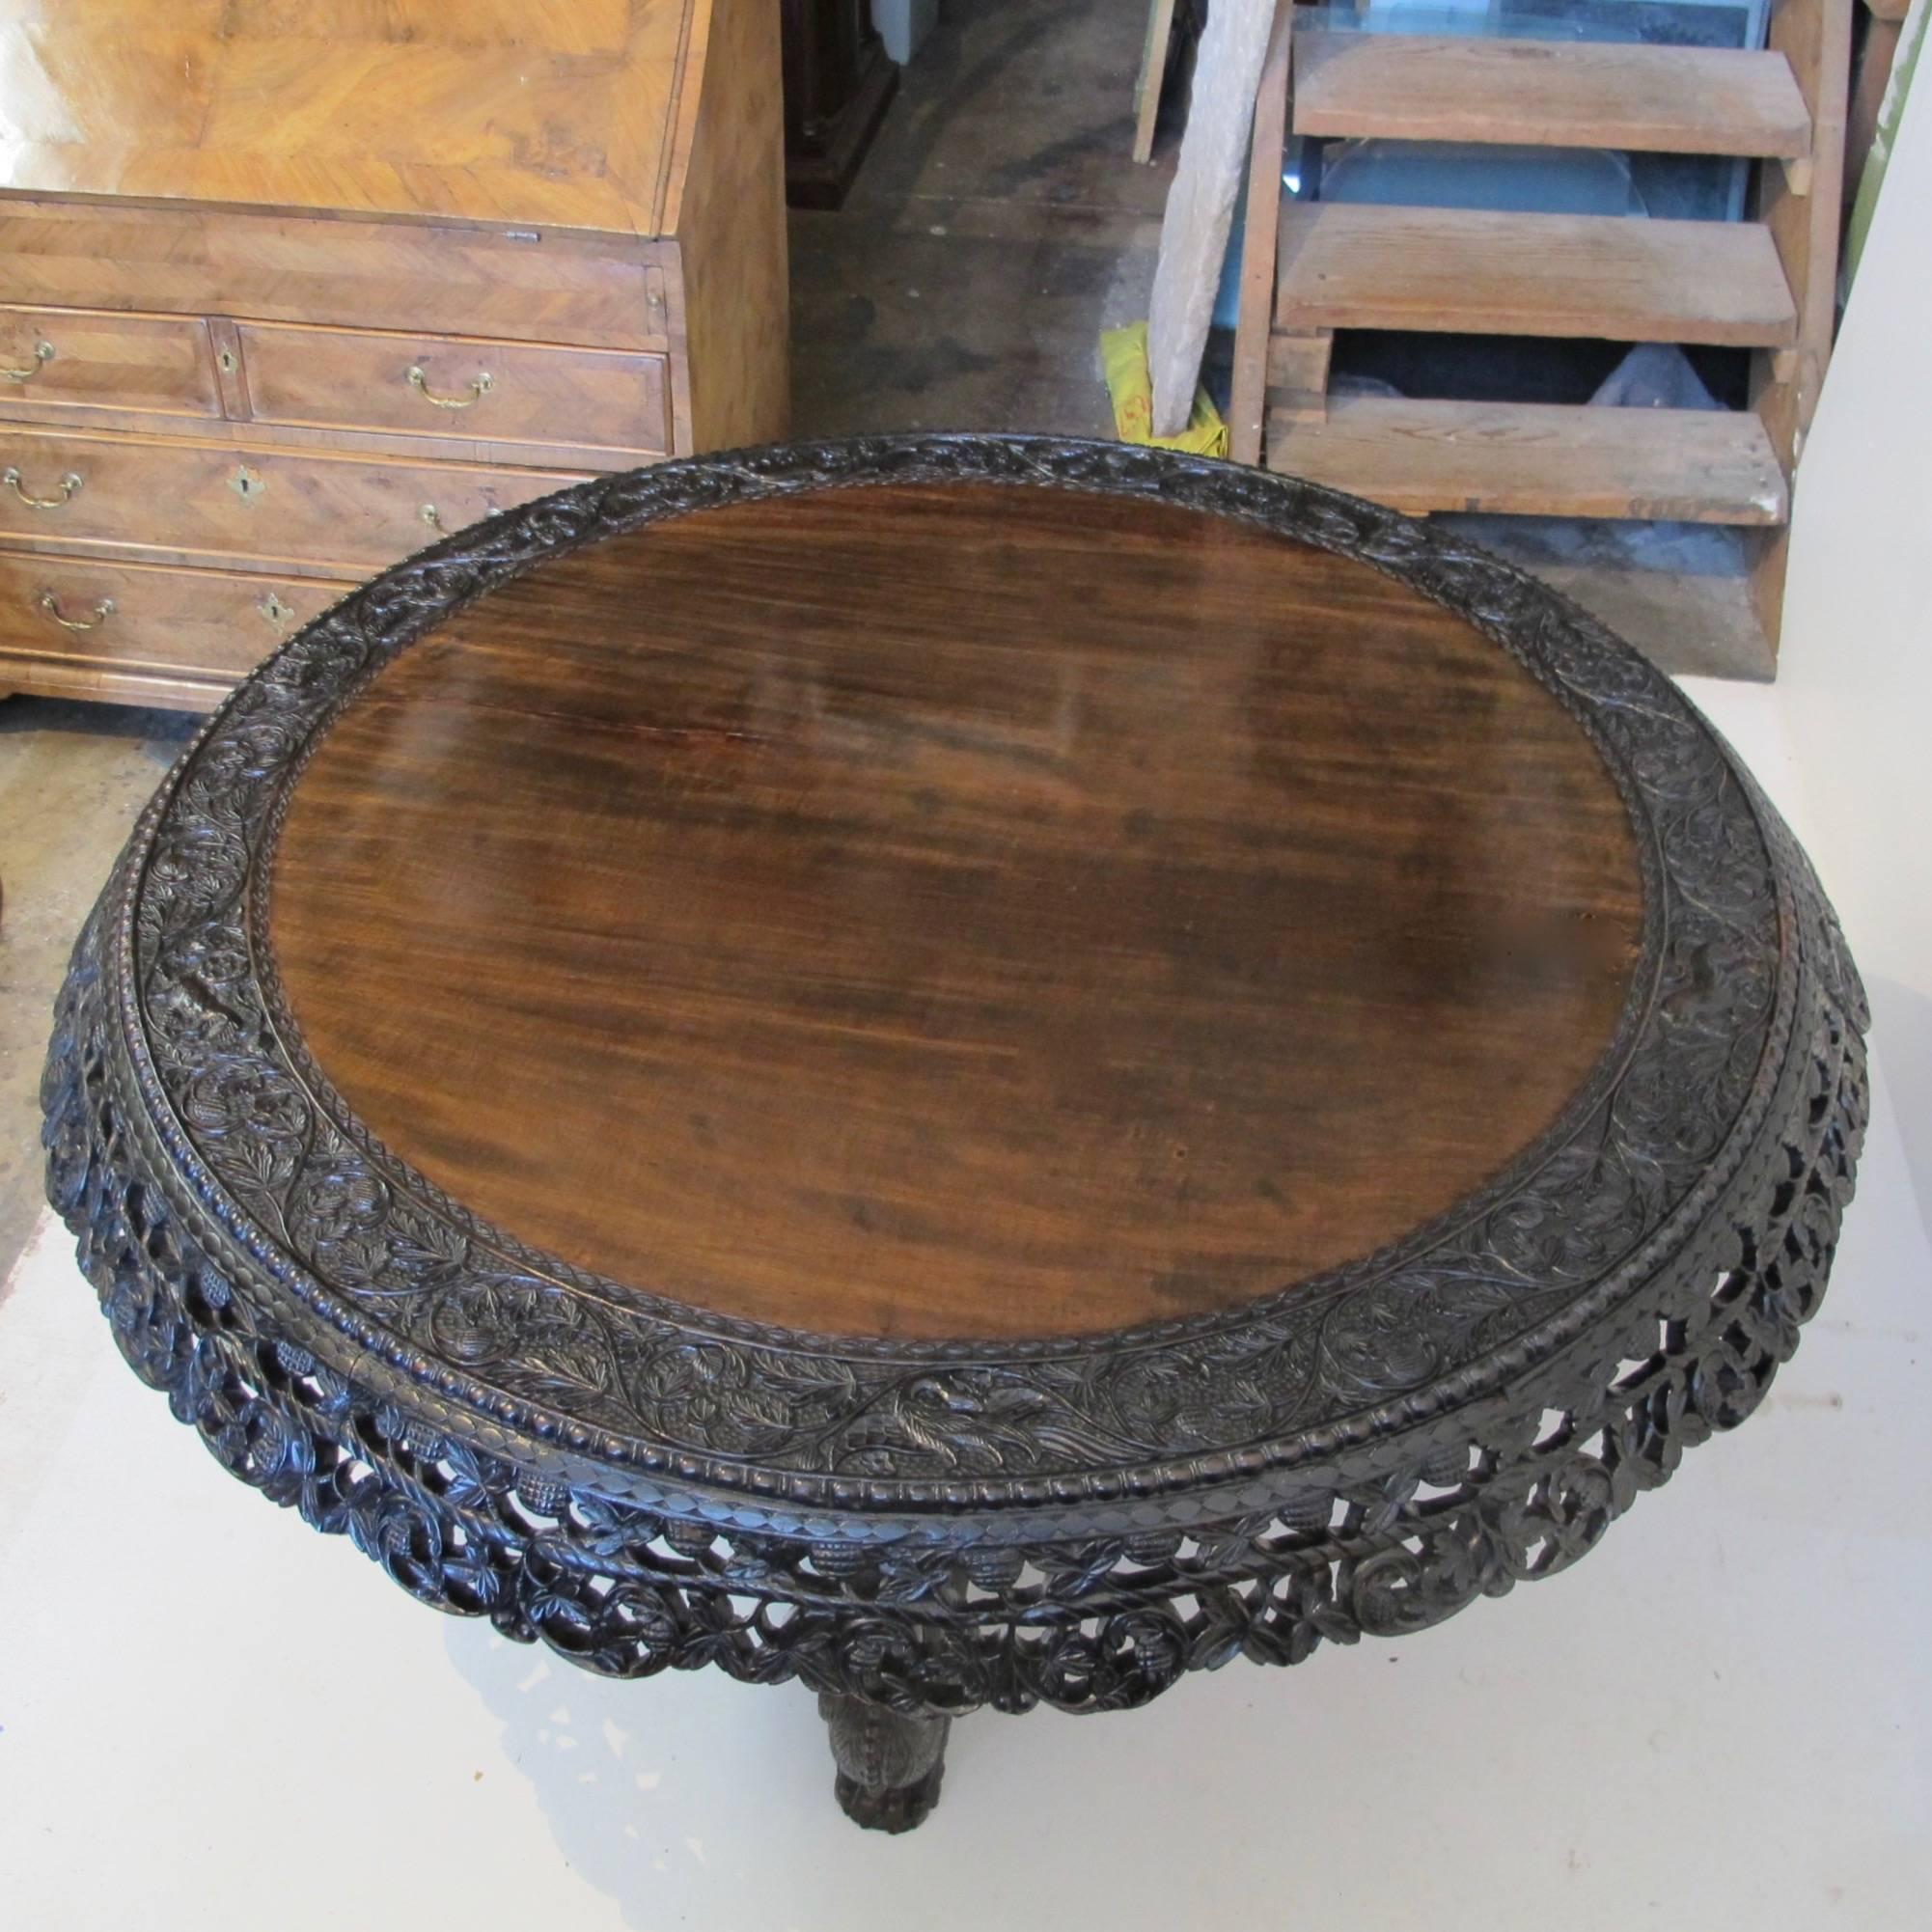 Large Antique Anglo-Indian Carved Padouk Wood Center Table, Mid 19th Century For Sale 4